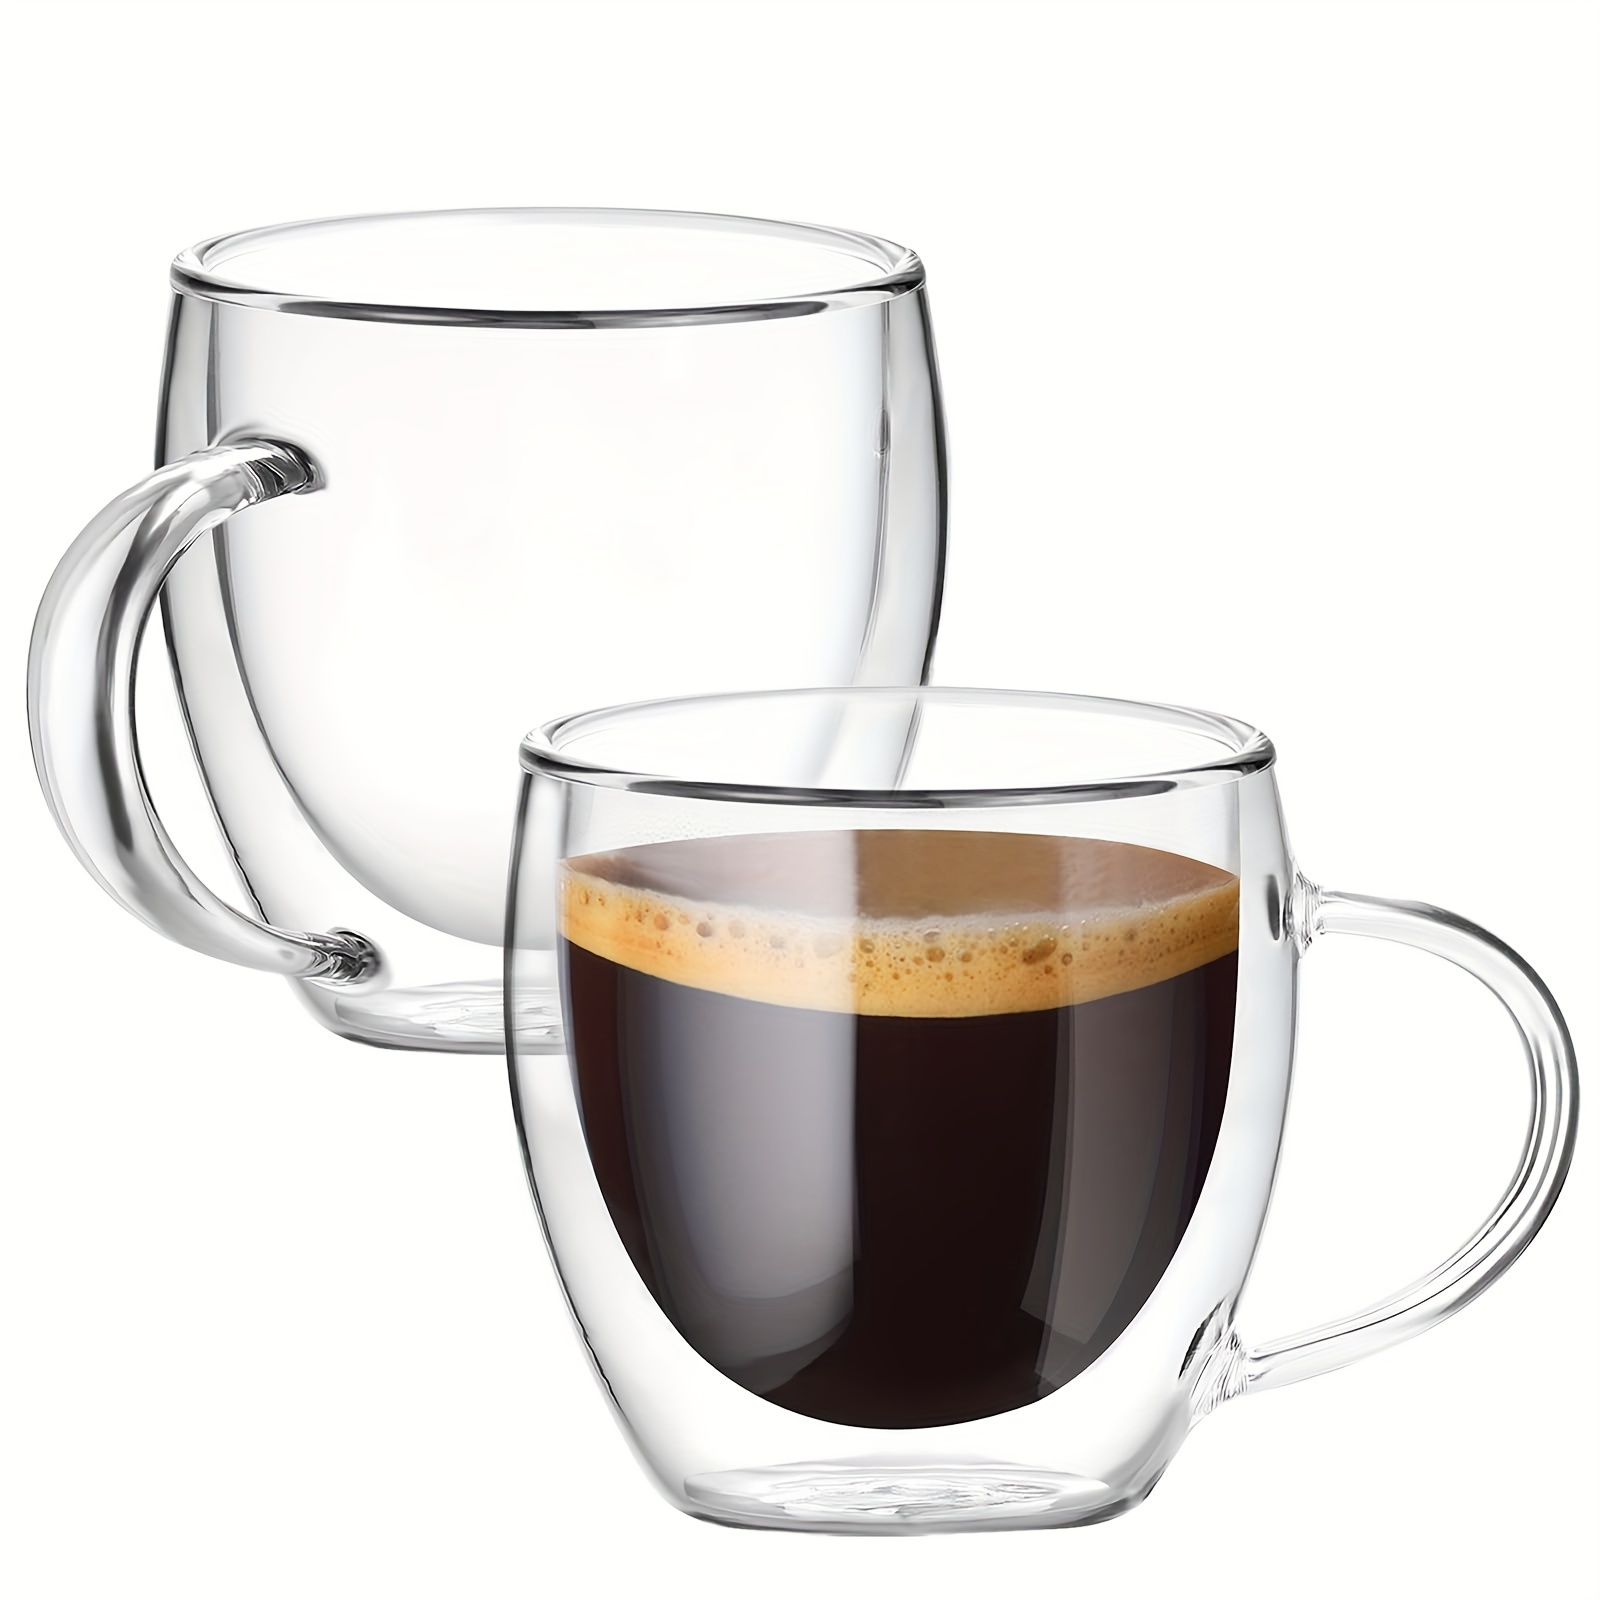 

2/4-pack 8oz Double-walled Glass Coffee Mugs - Heat Resistant, Insulated Borosilicate Glass Cups For Coffee, Milkshakes & Juice - Reusable, Handwash Only